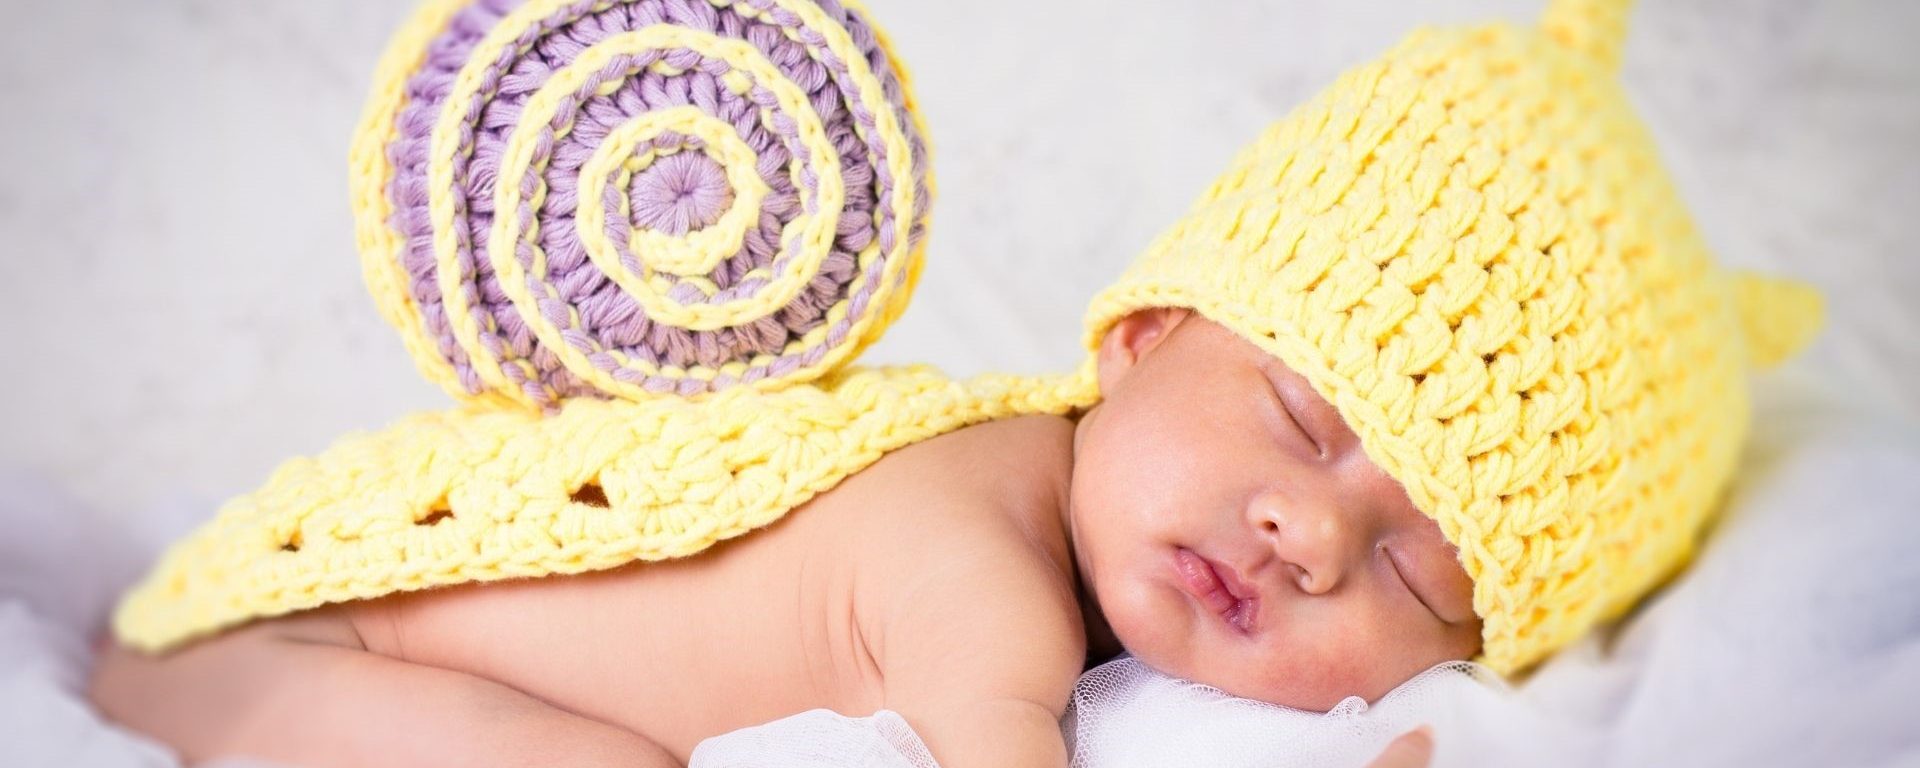 Comments And Wishes For New Born Baby Pictures On Social Media